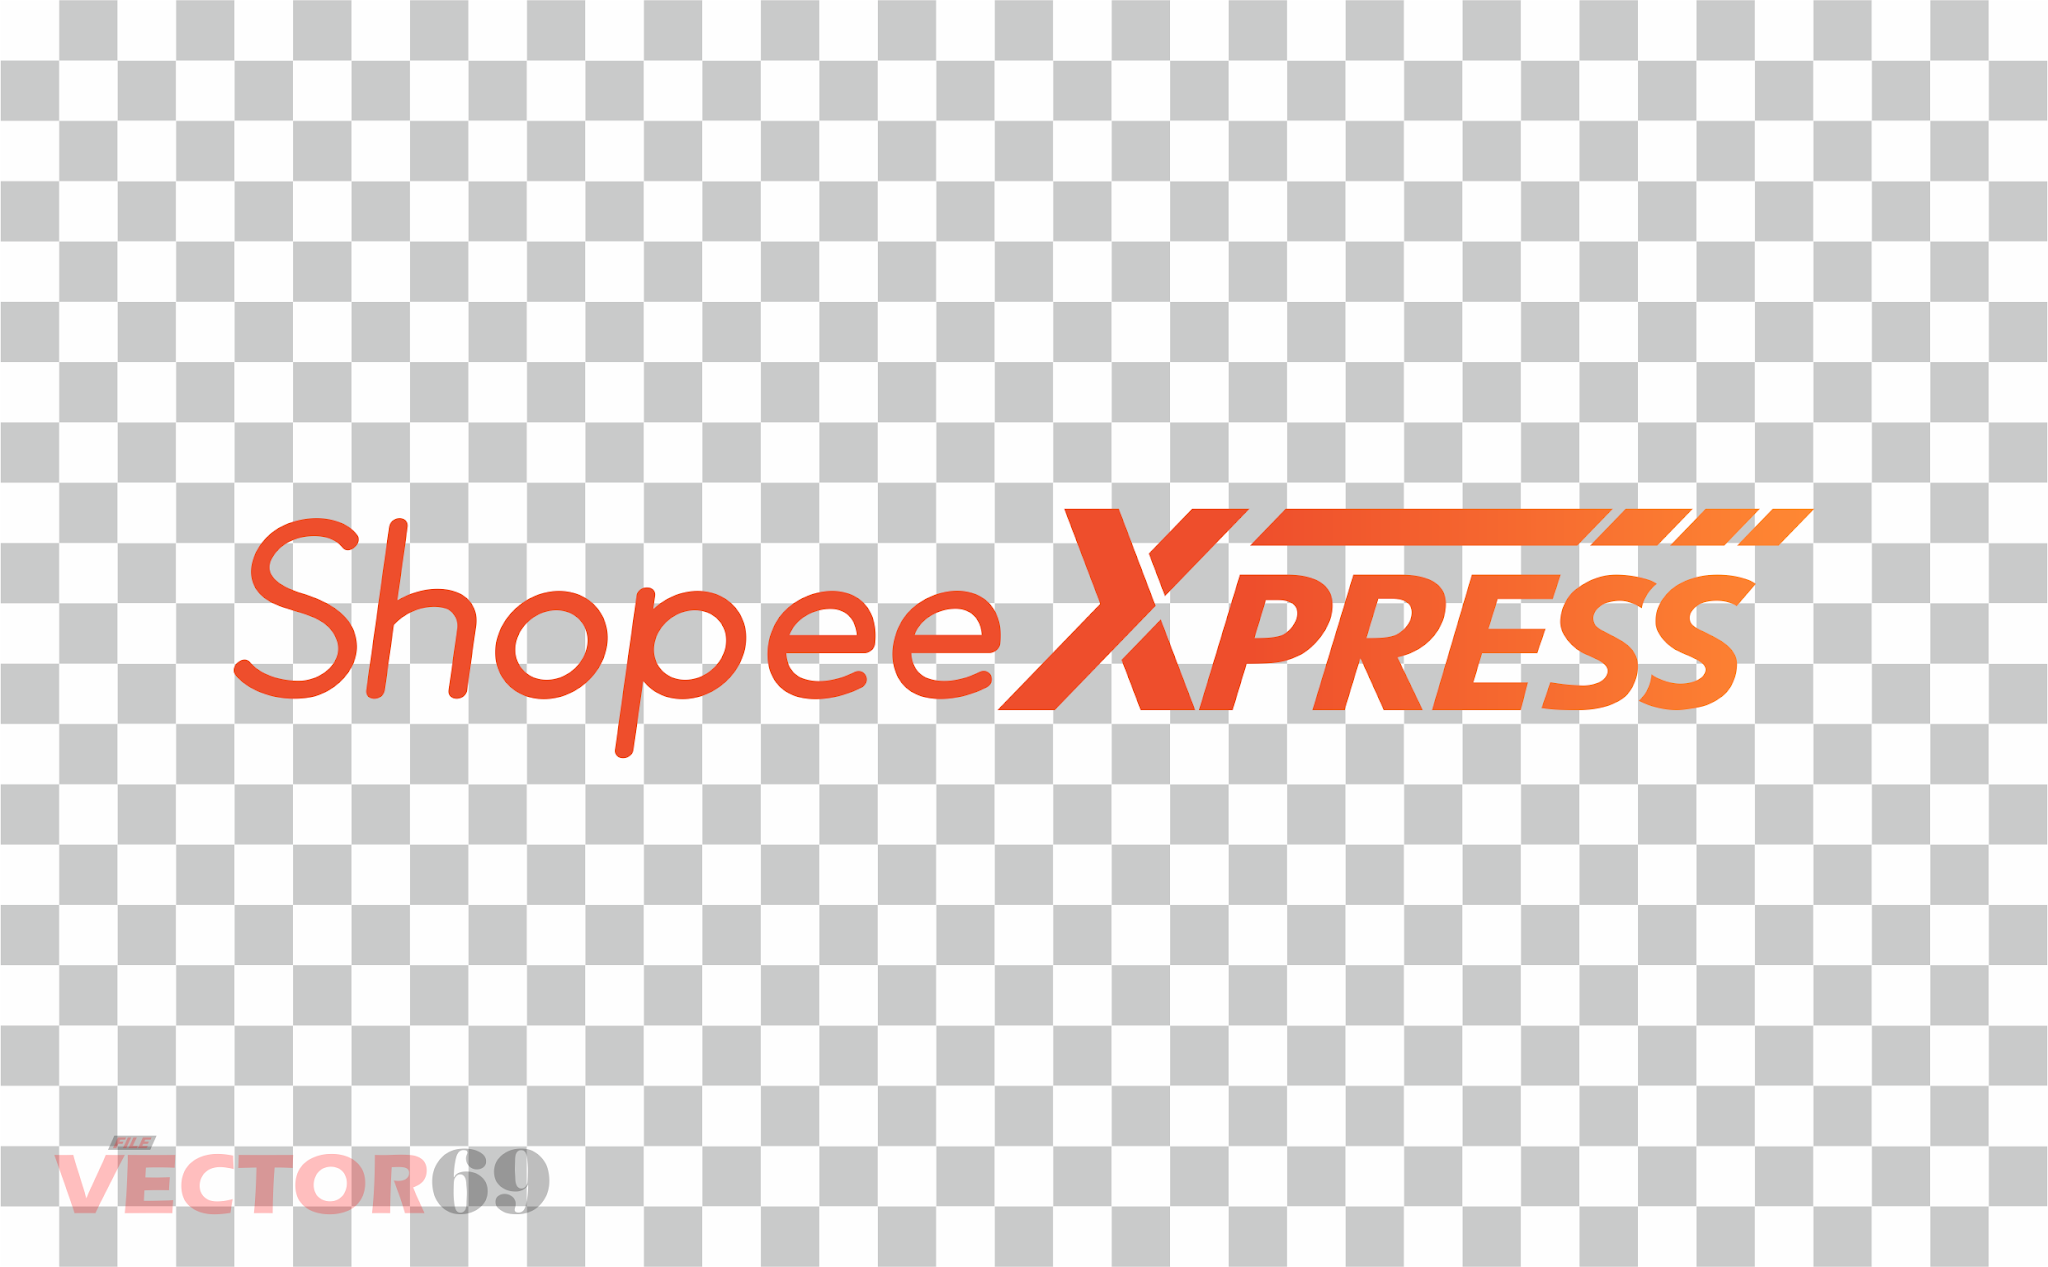 SPX (Shopee Express) Logo - Download Vector File PNG (Portable Network Graphics)